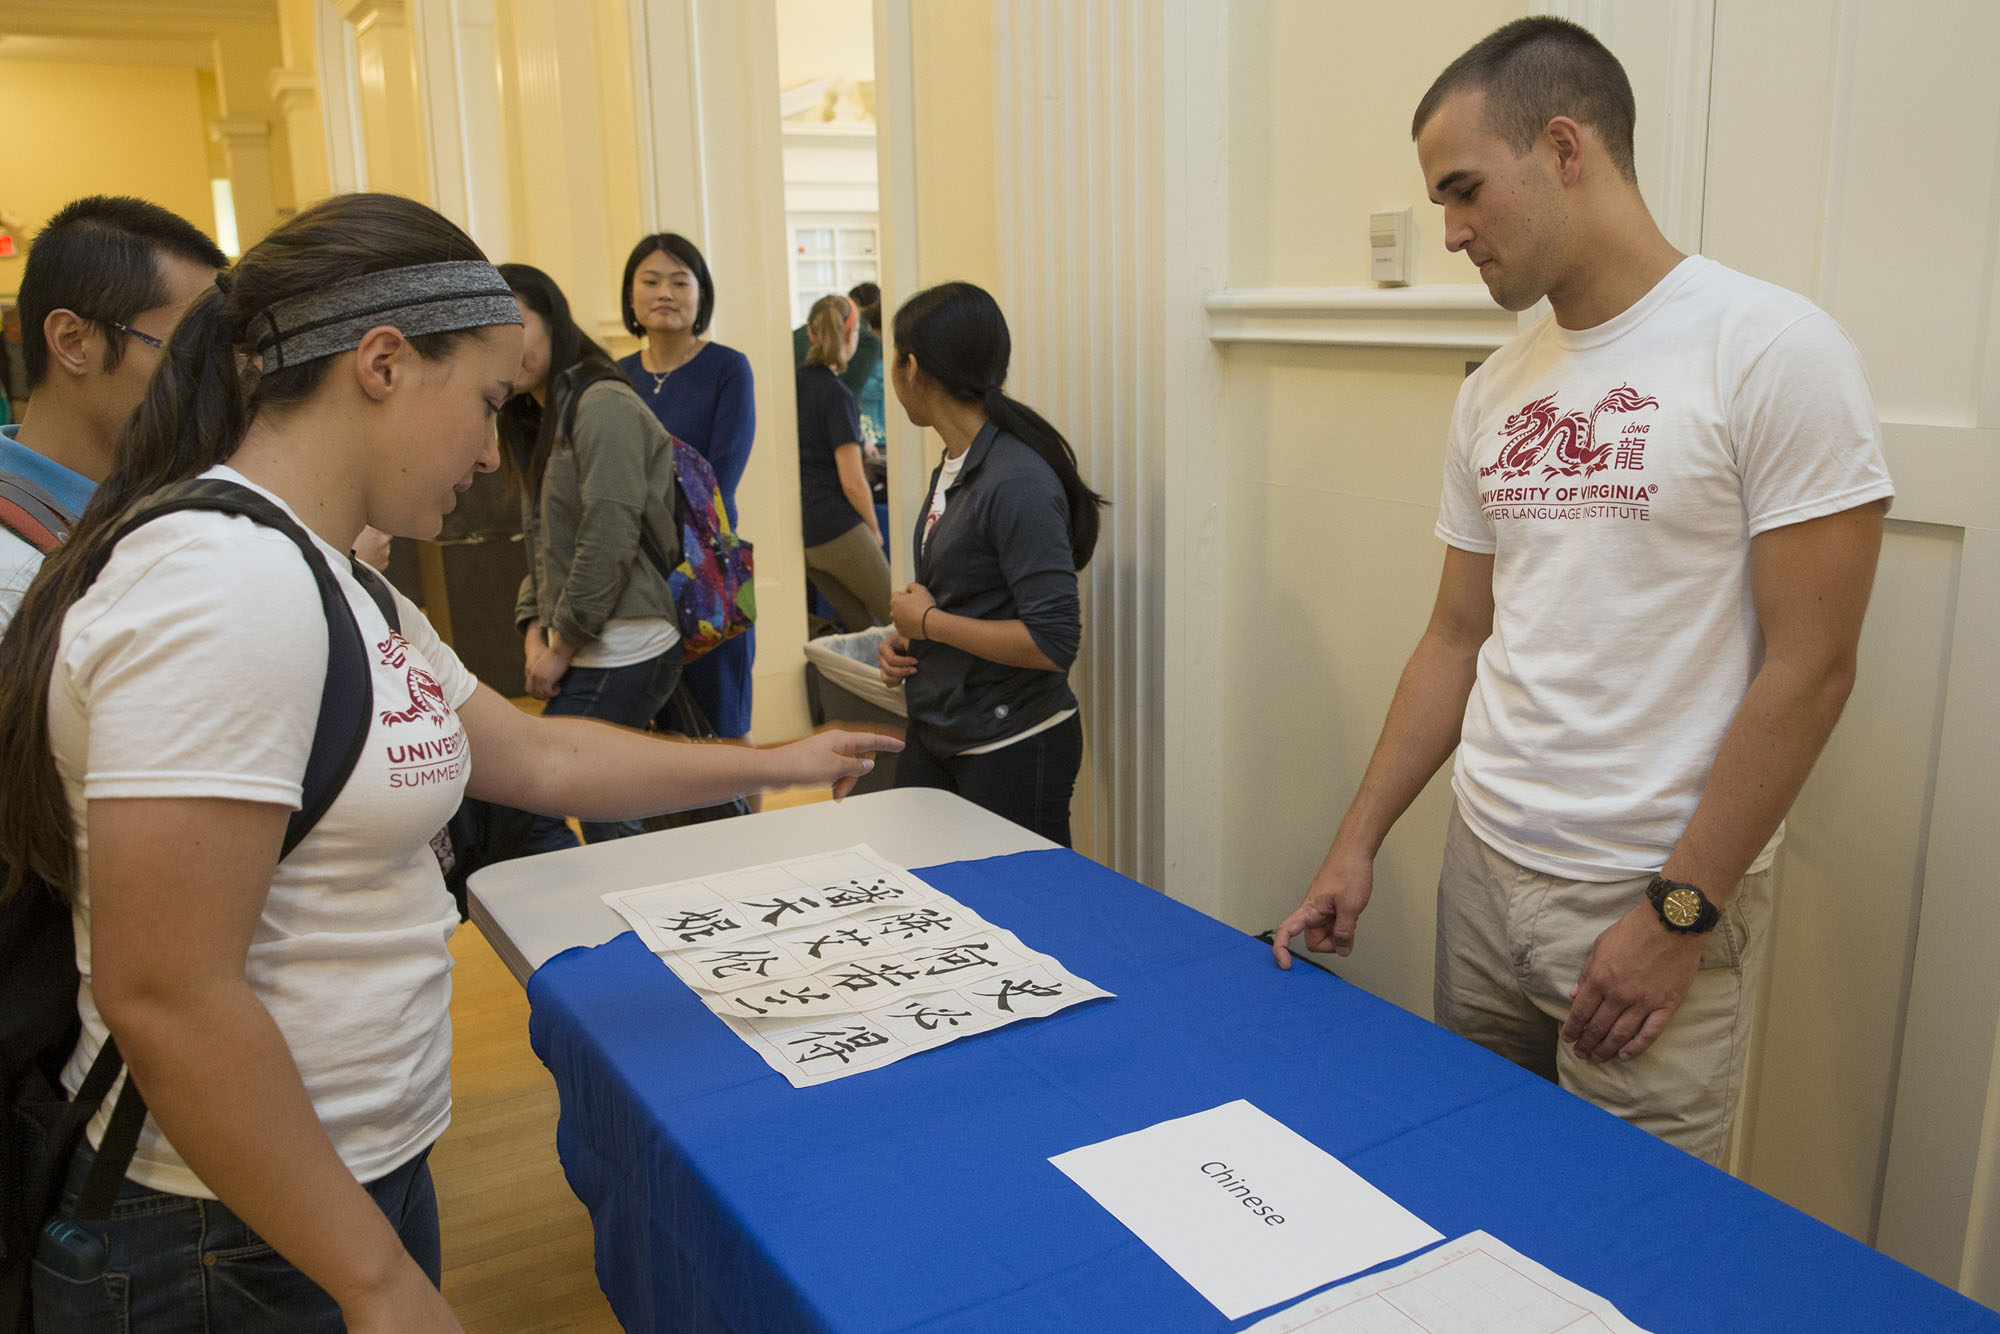 Air Force ROTC Cadet William Mullins (right), stands at a table with Chinese on it during a student fair